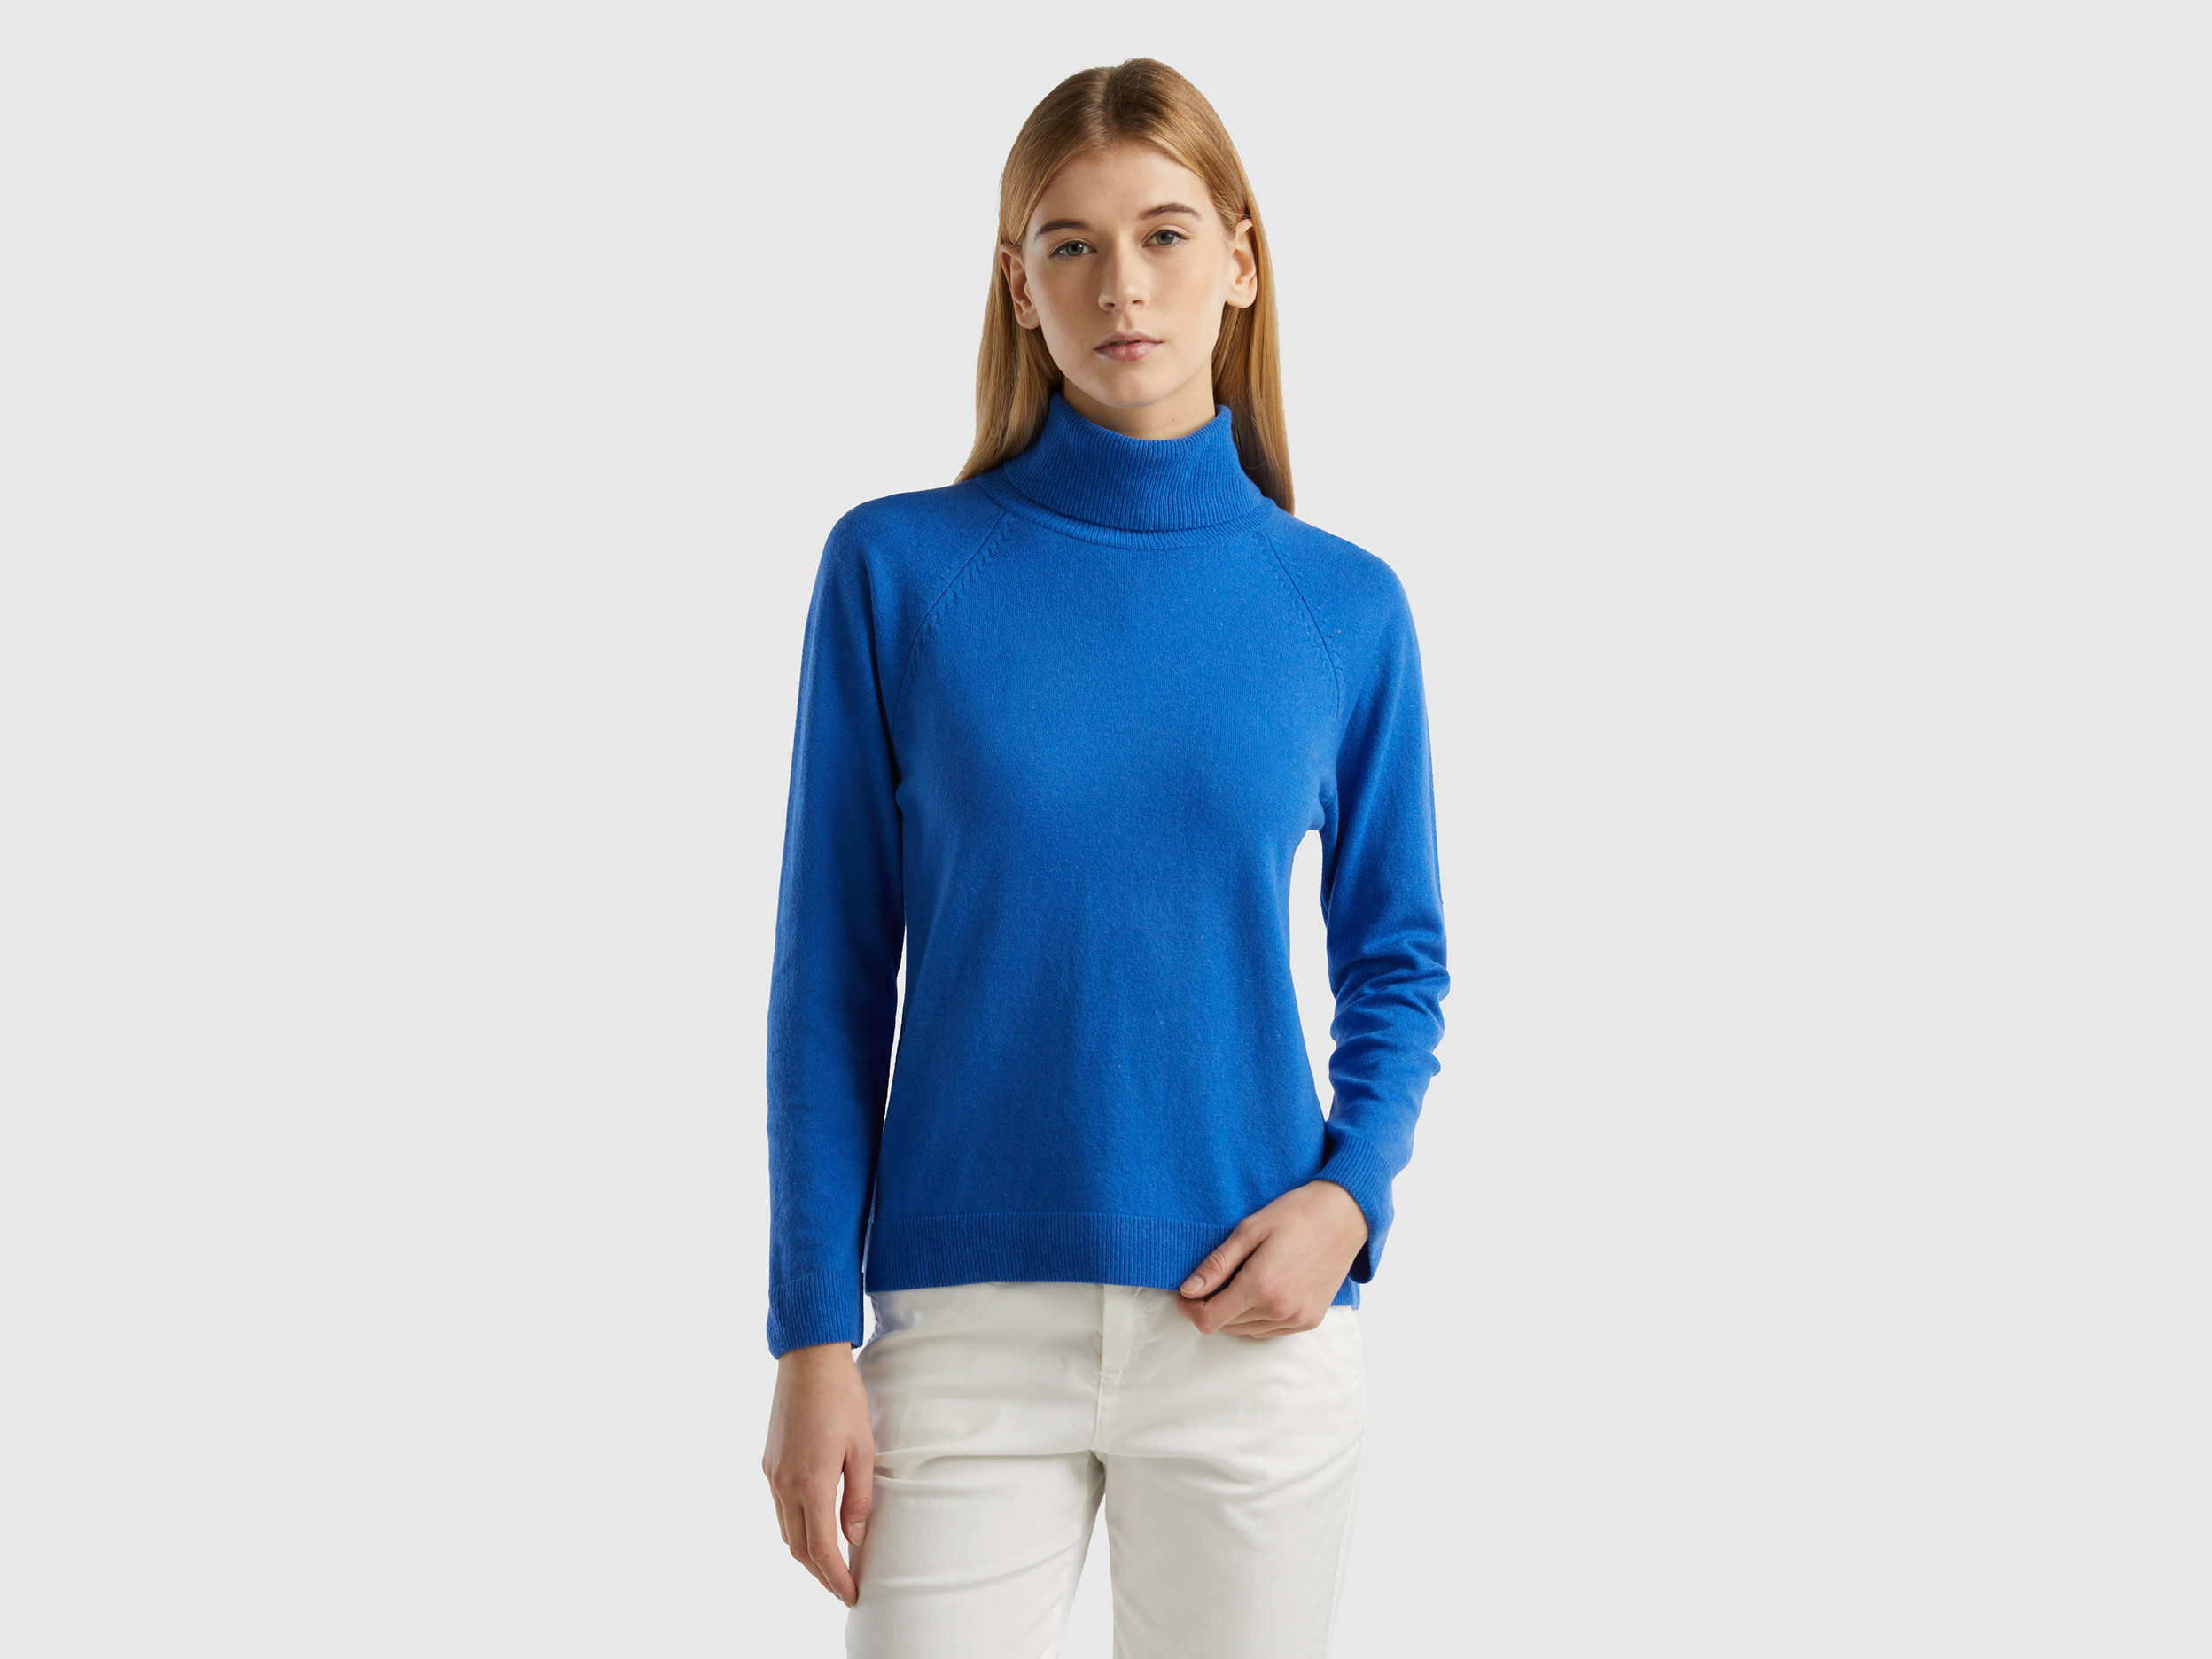 Benetton, Blue Turtleneck Sweater In Cashmere And Wool Blend, size XL, Blue, Women